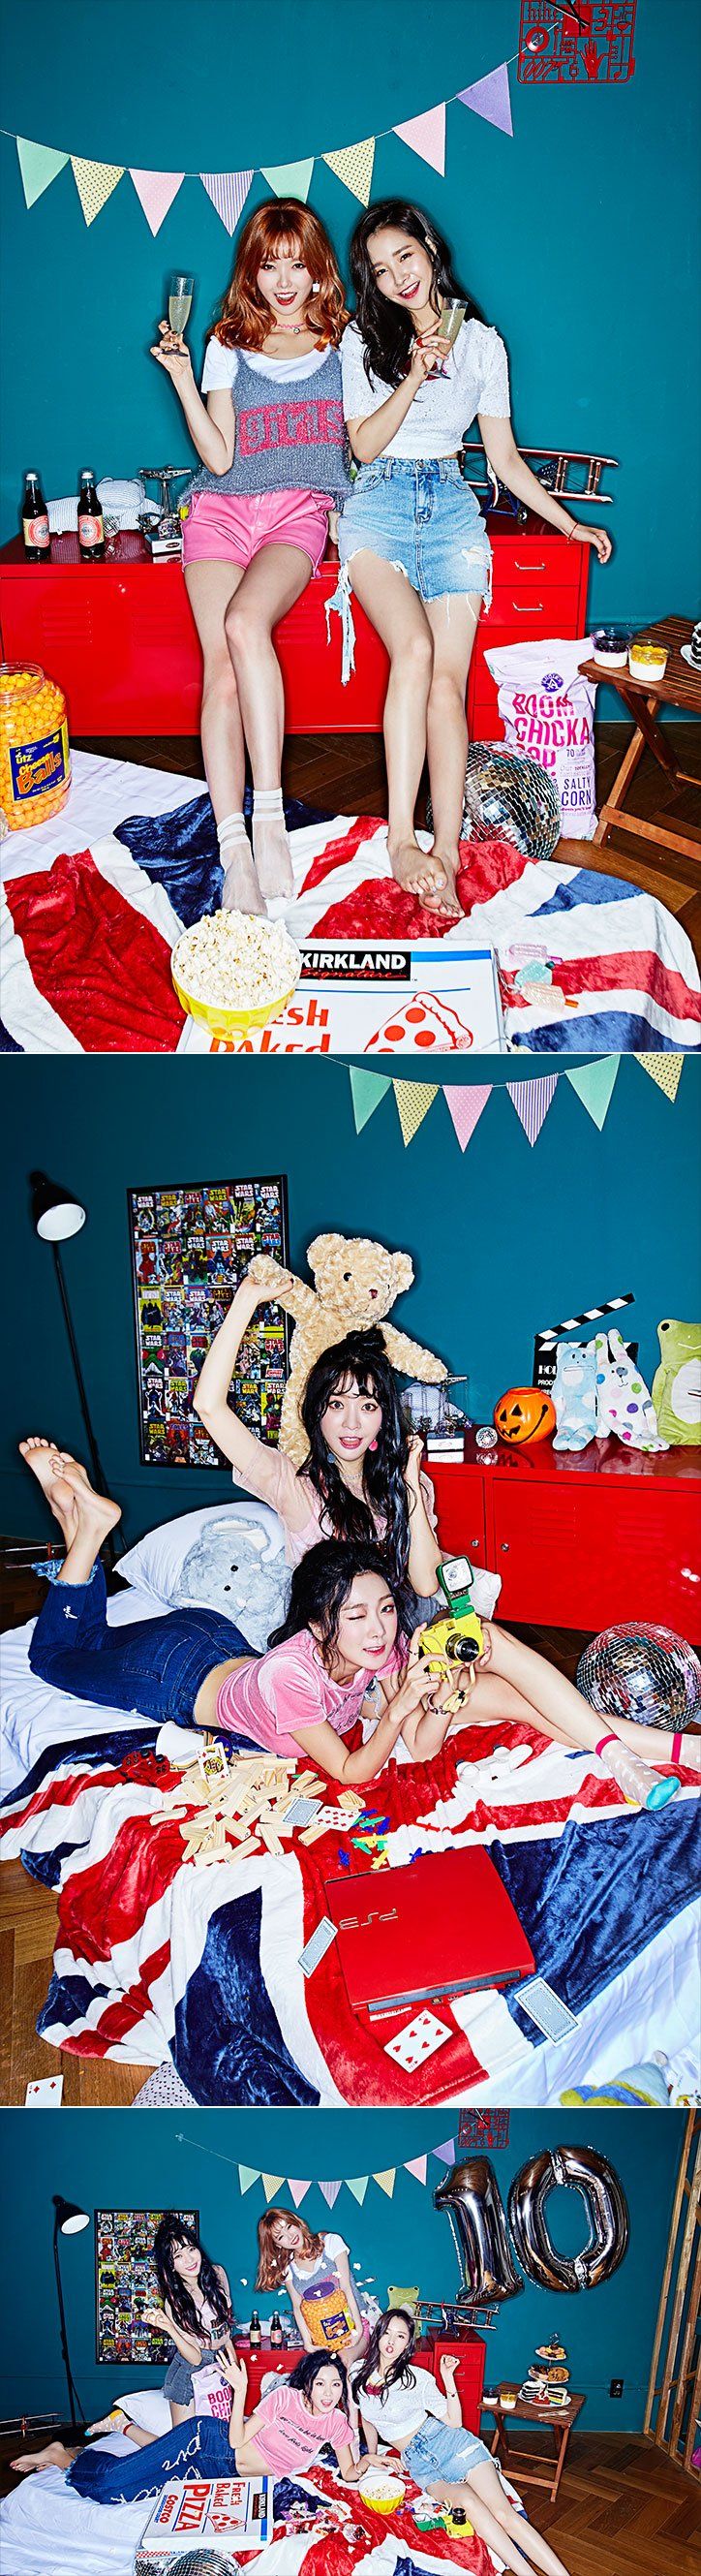 Image: 'Weekend' image teasers for Dalshabet / Happy Face Entertainment